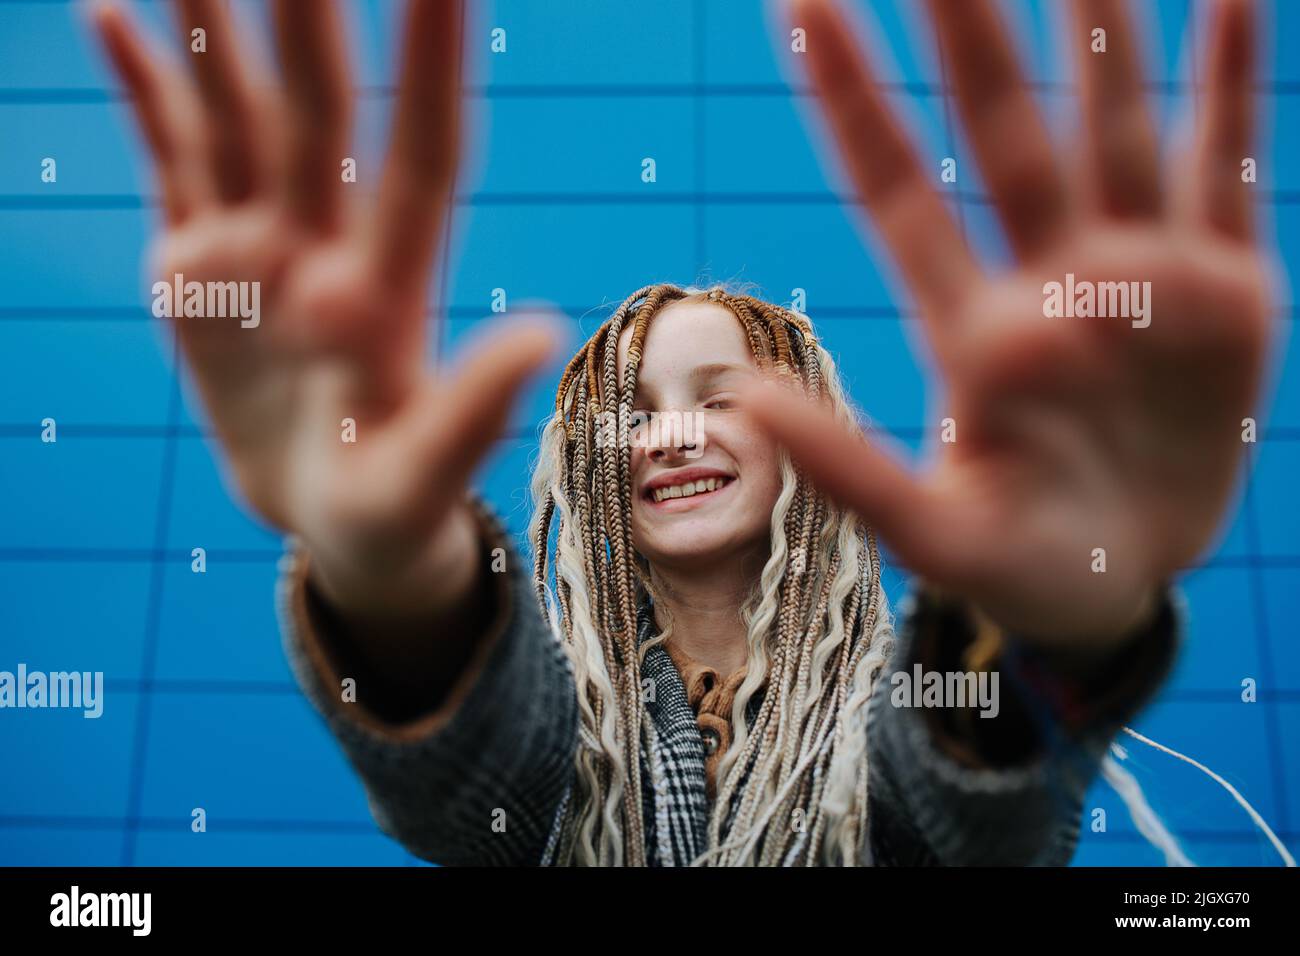 Lighthearted teenage girl blocking camera with hands in front of a blue panel wall covering. She is wearing a grey checkered jacket. Stock Photo